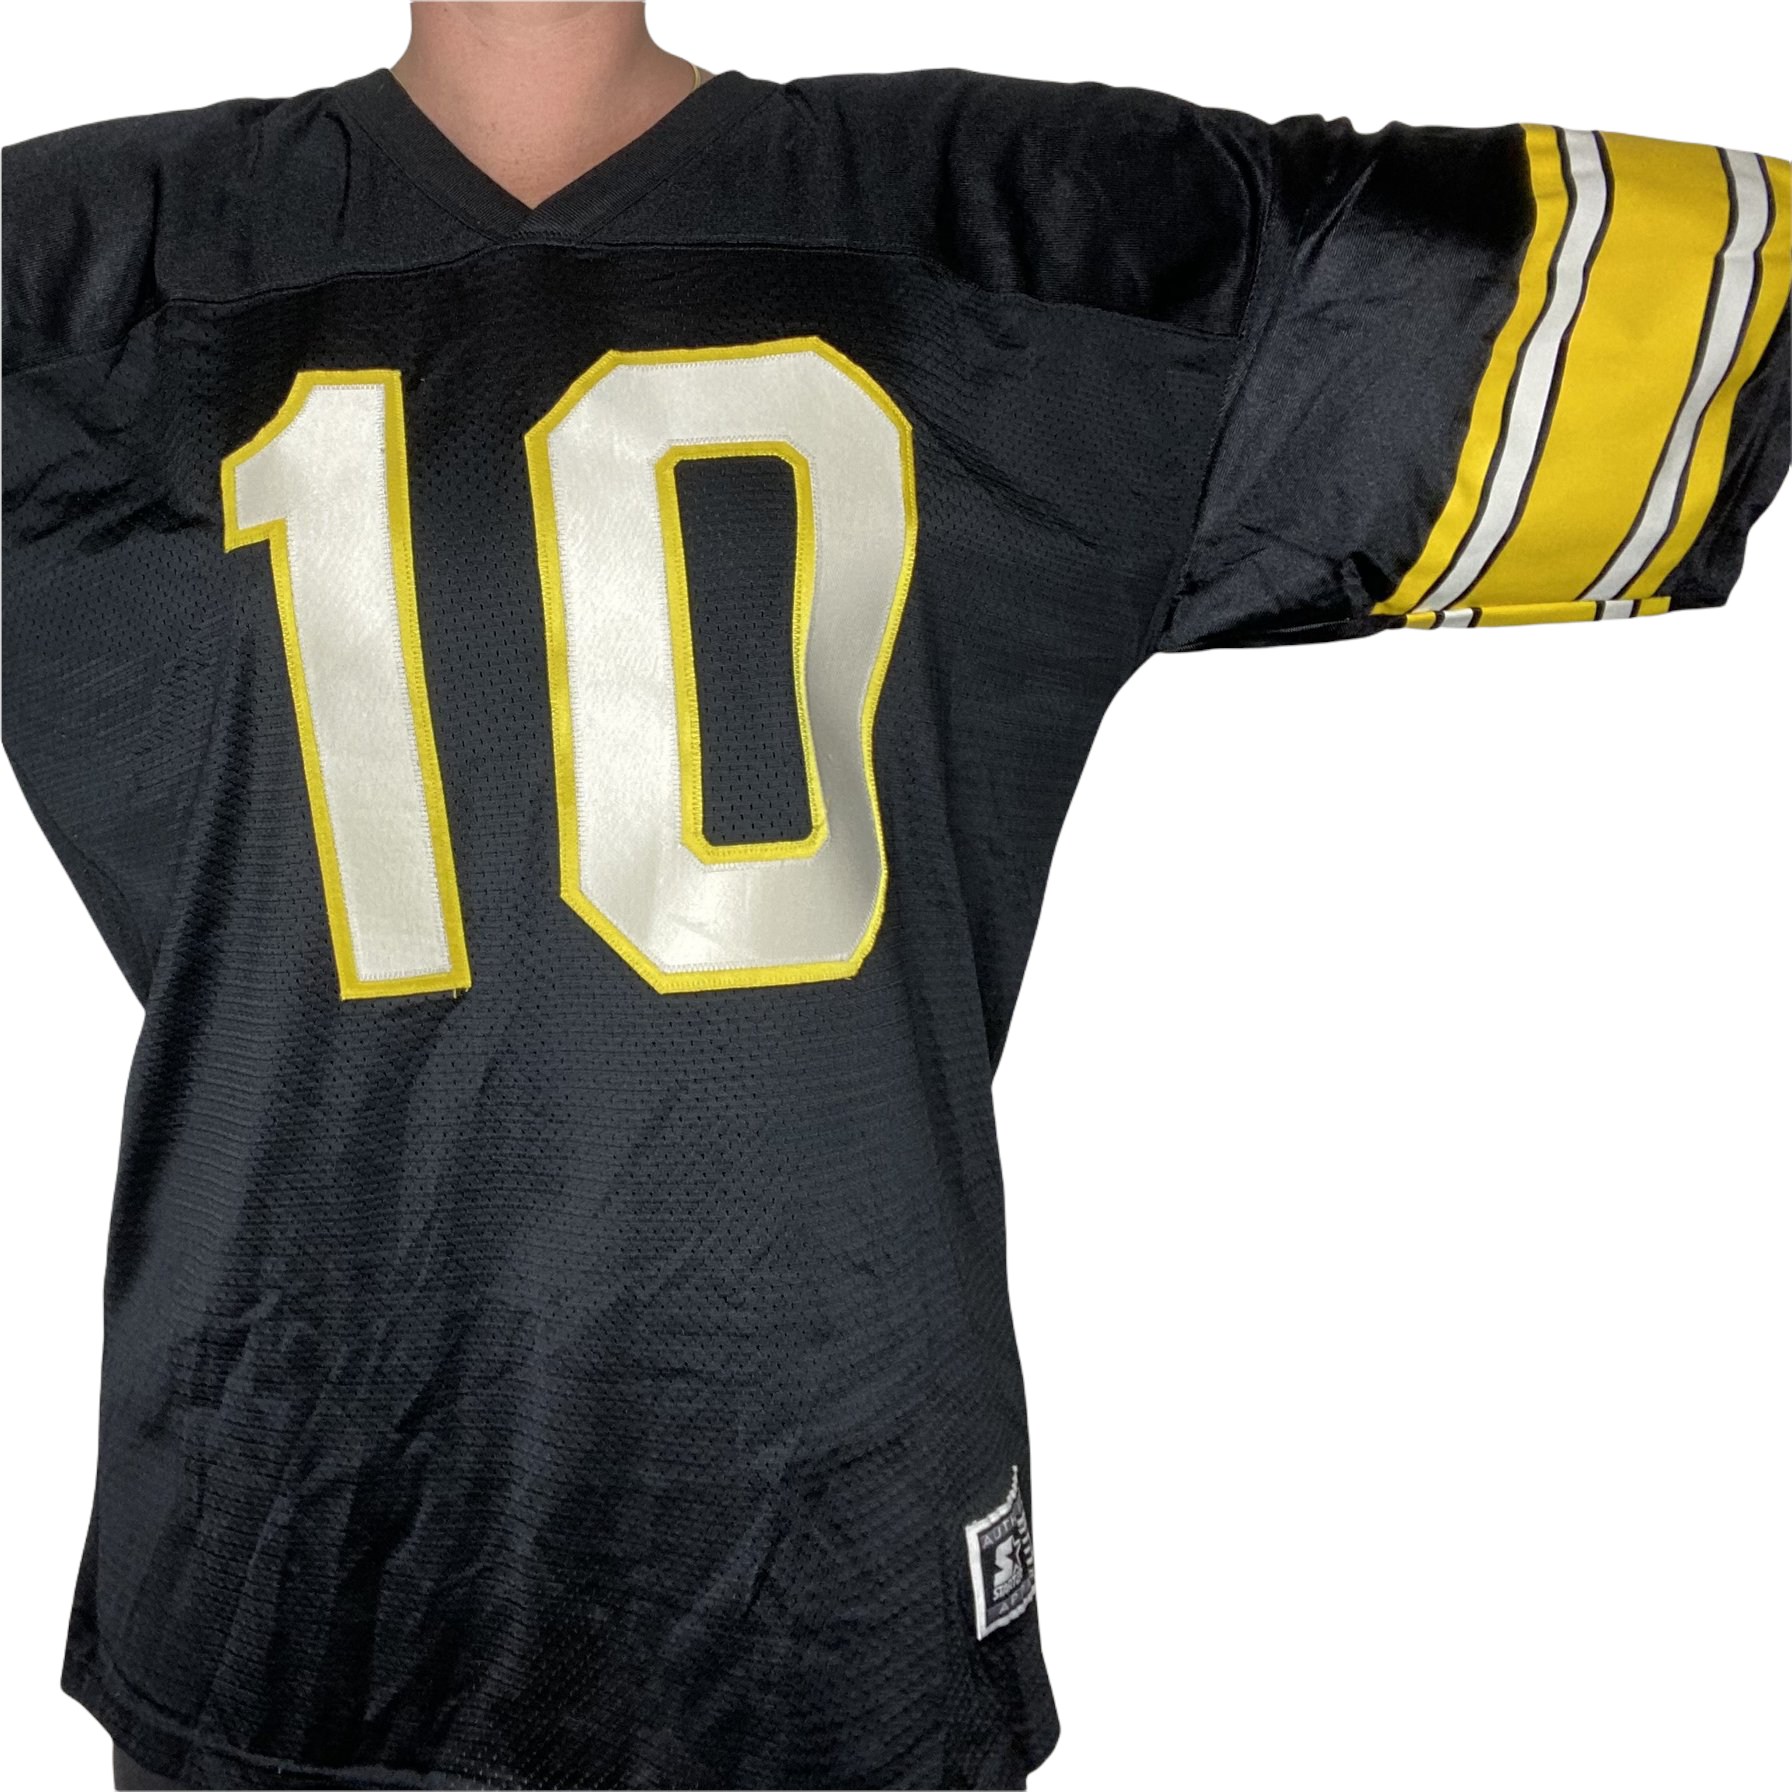 4xl pittsburgh steelers jersey